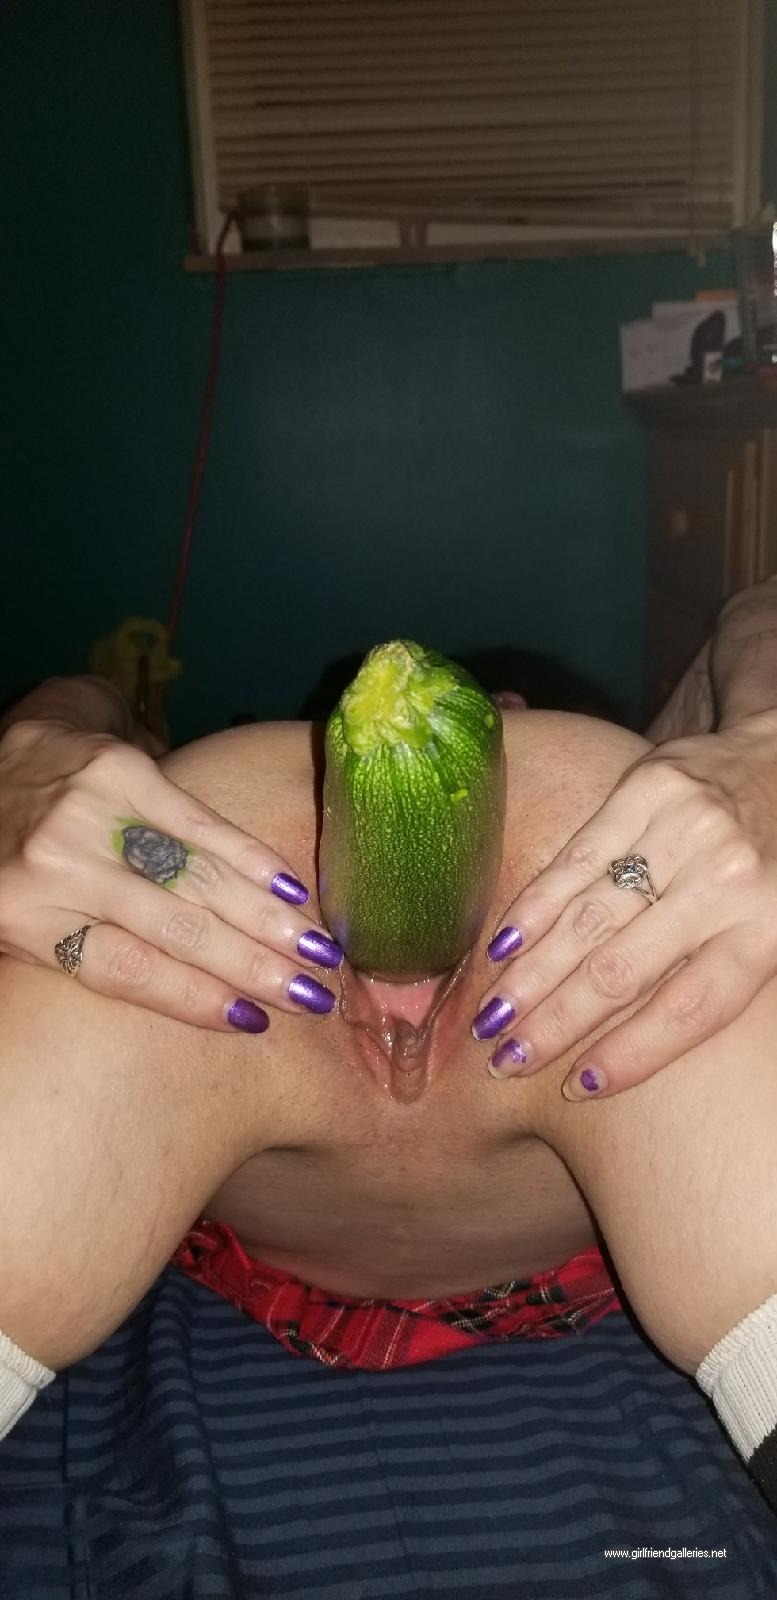 She loves showing her pussy